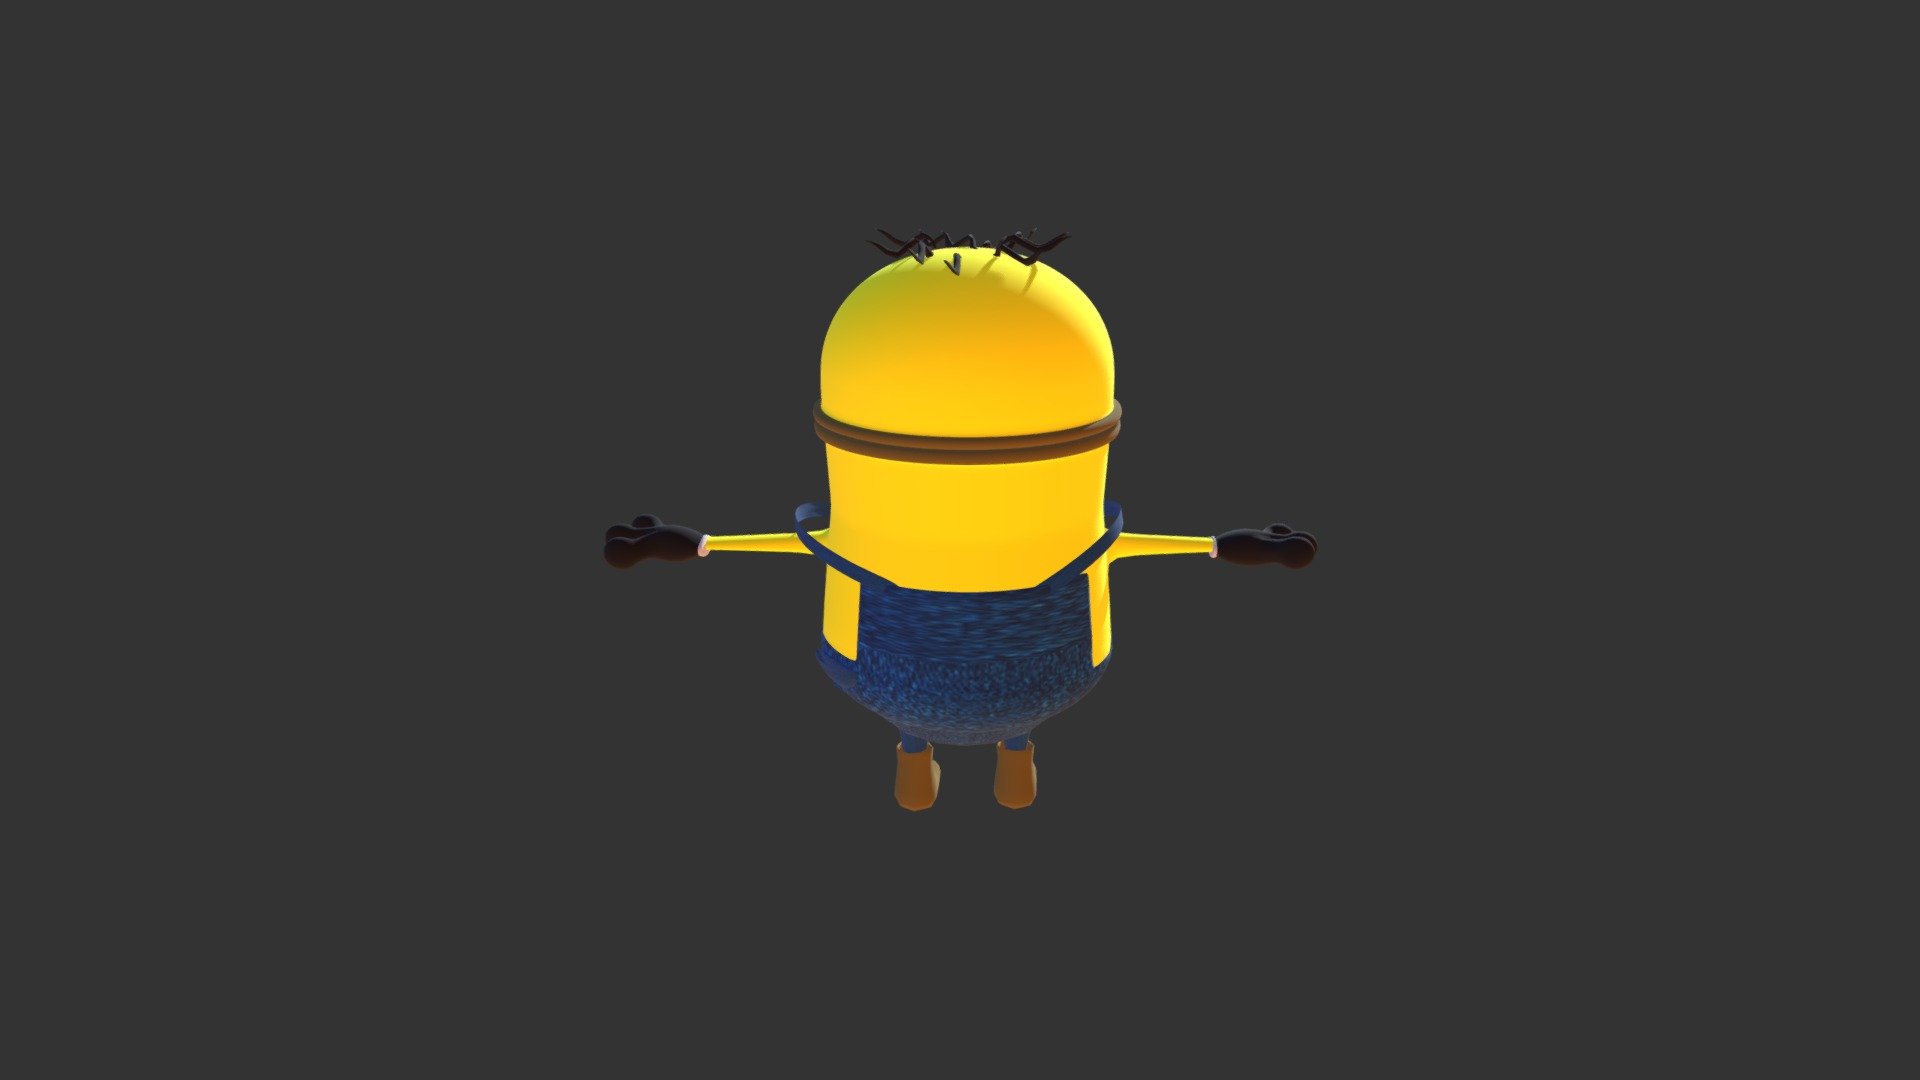 Minions download the last version for windows